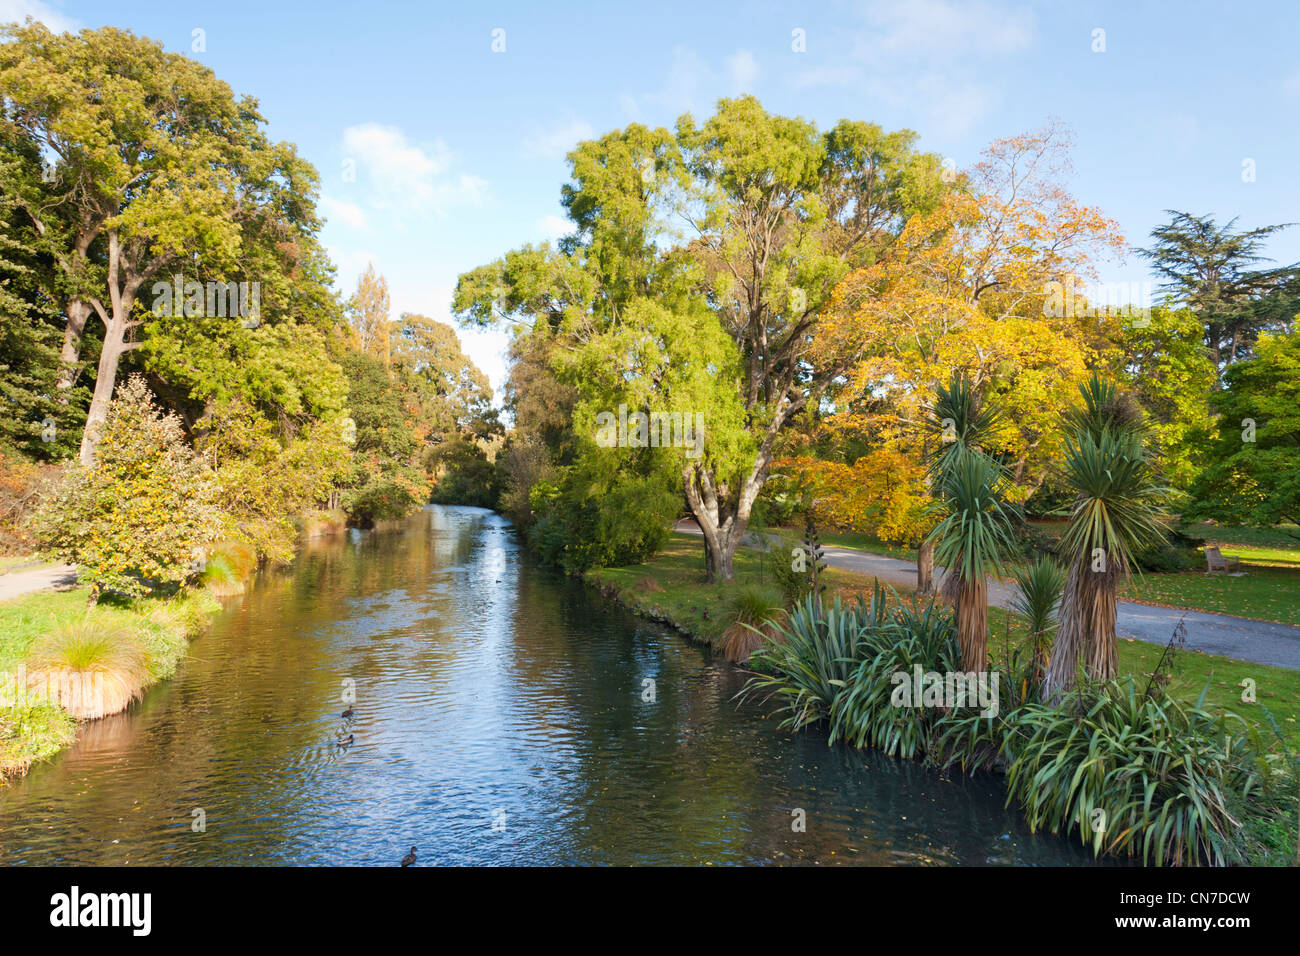 The Avon River as it passes through Hagley Park, Christchurch, New Zealand, in early autumn. Stock Photo